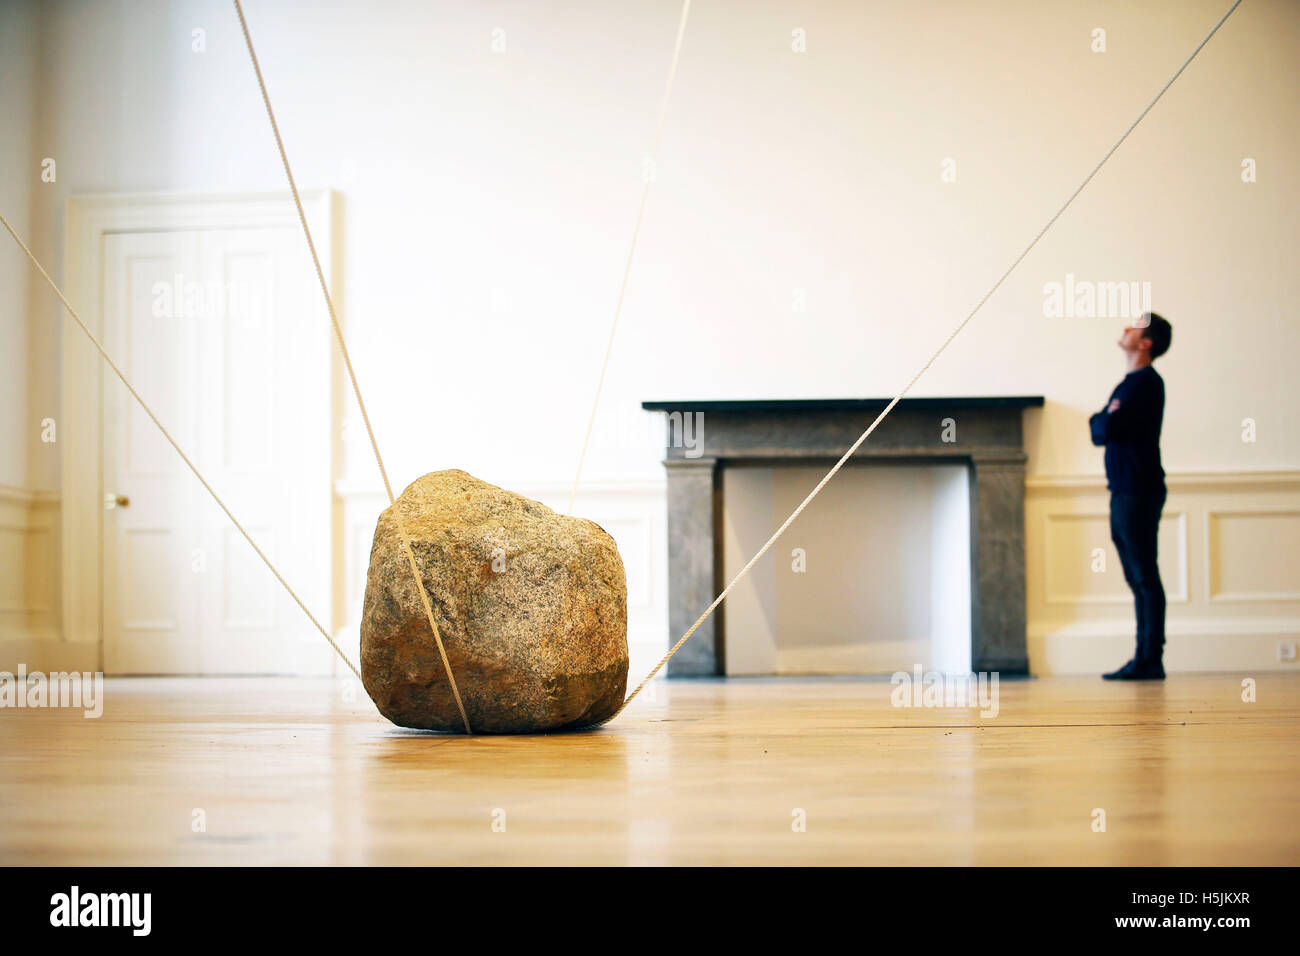 Harris Brine, from the National Galleries of Scotland, takes a closer look at an abstract sculpture called 'Interconnected Spaces' by contemporary artist Karla Black which features in a new exhibition 'A New Order' at the Scottish National Gallery of Modern Art in Edinburgh. Stock Photo